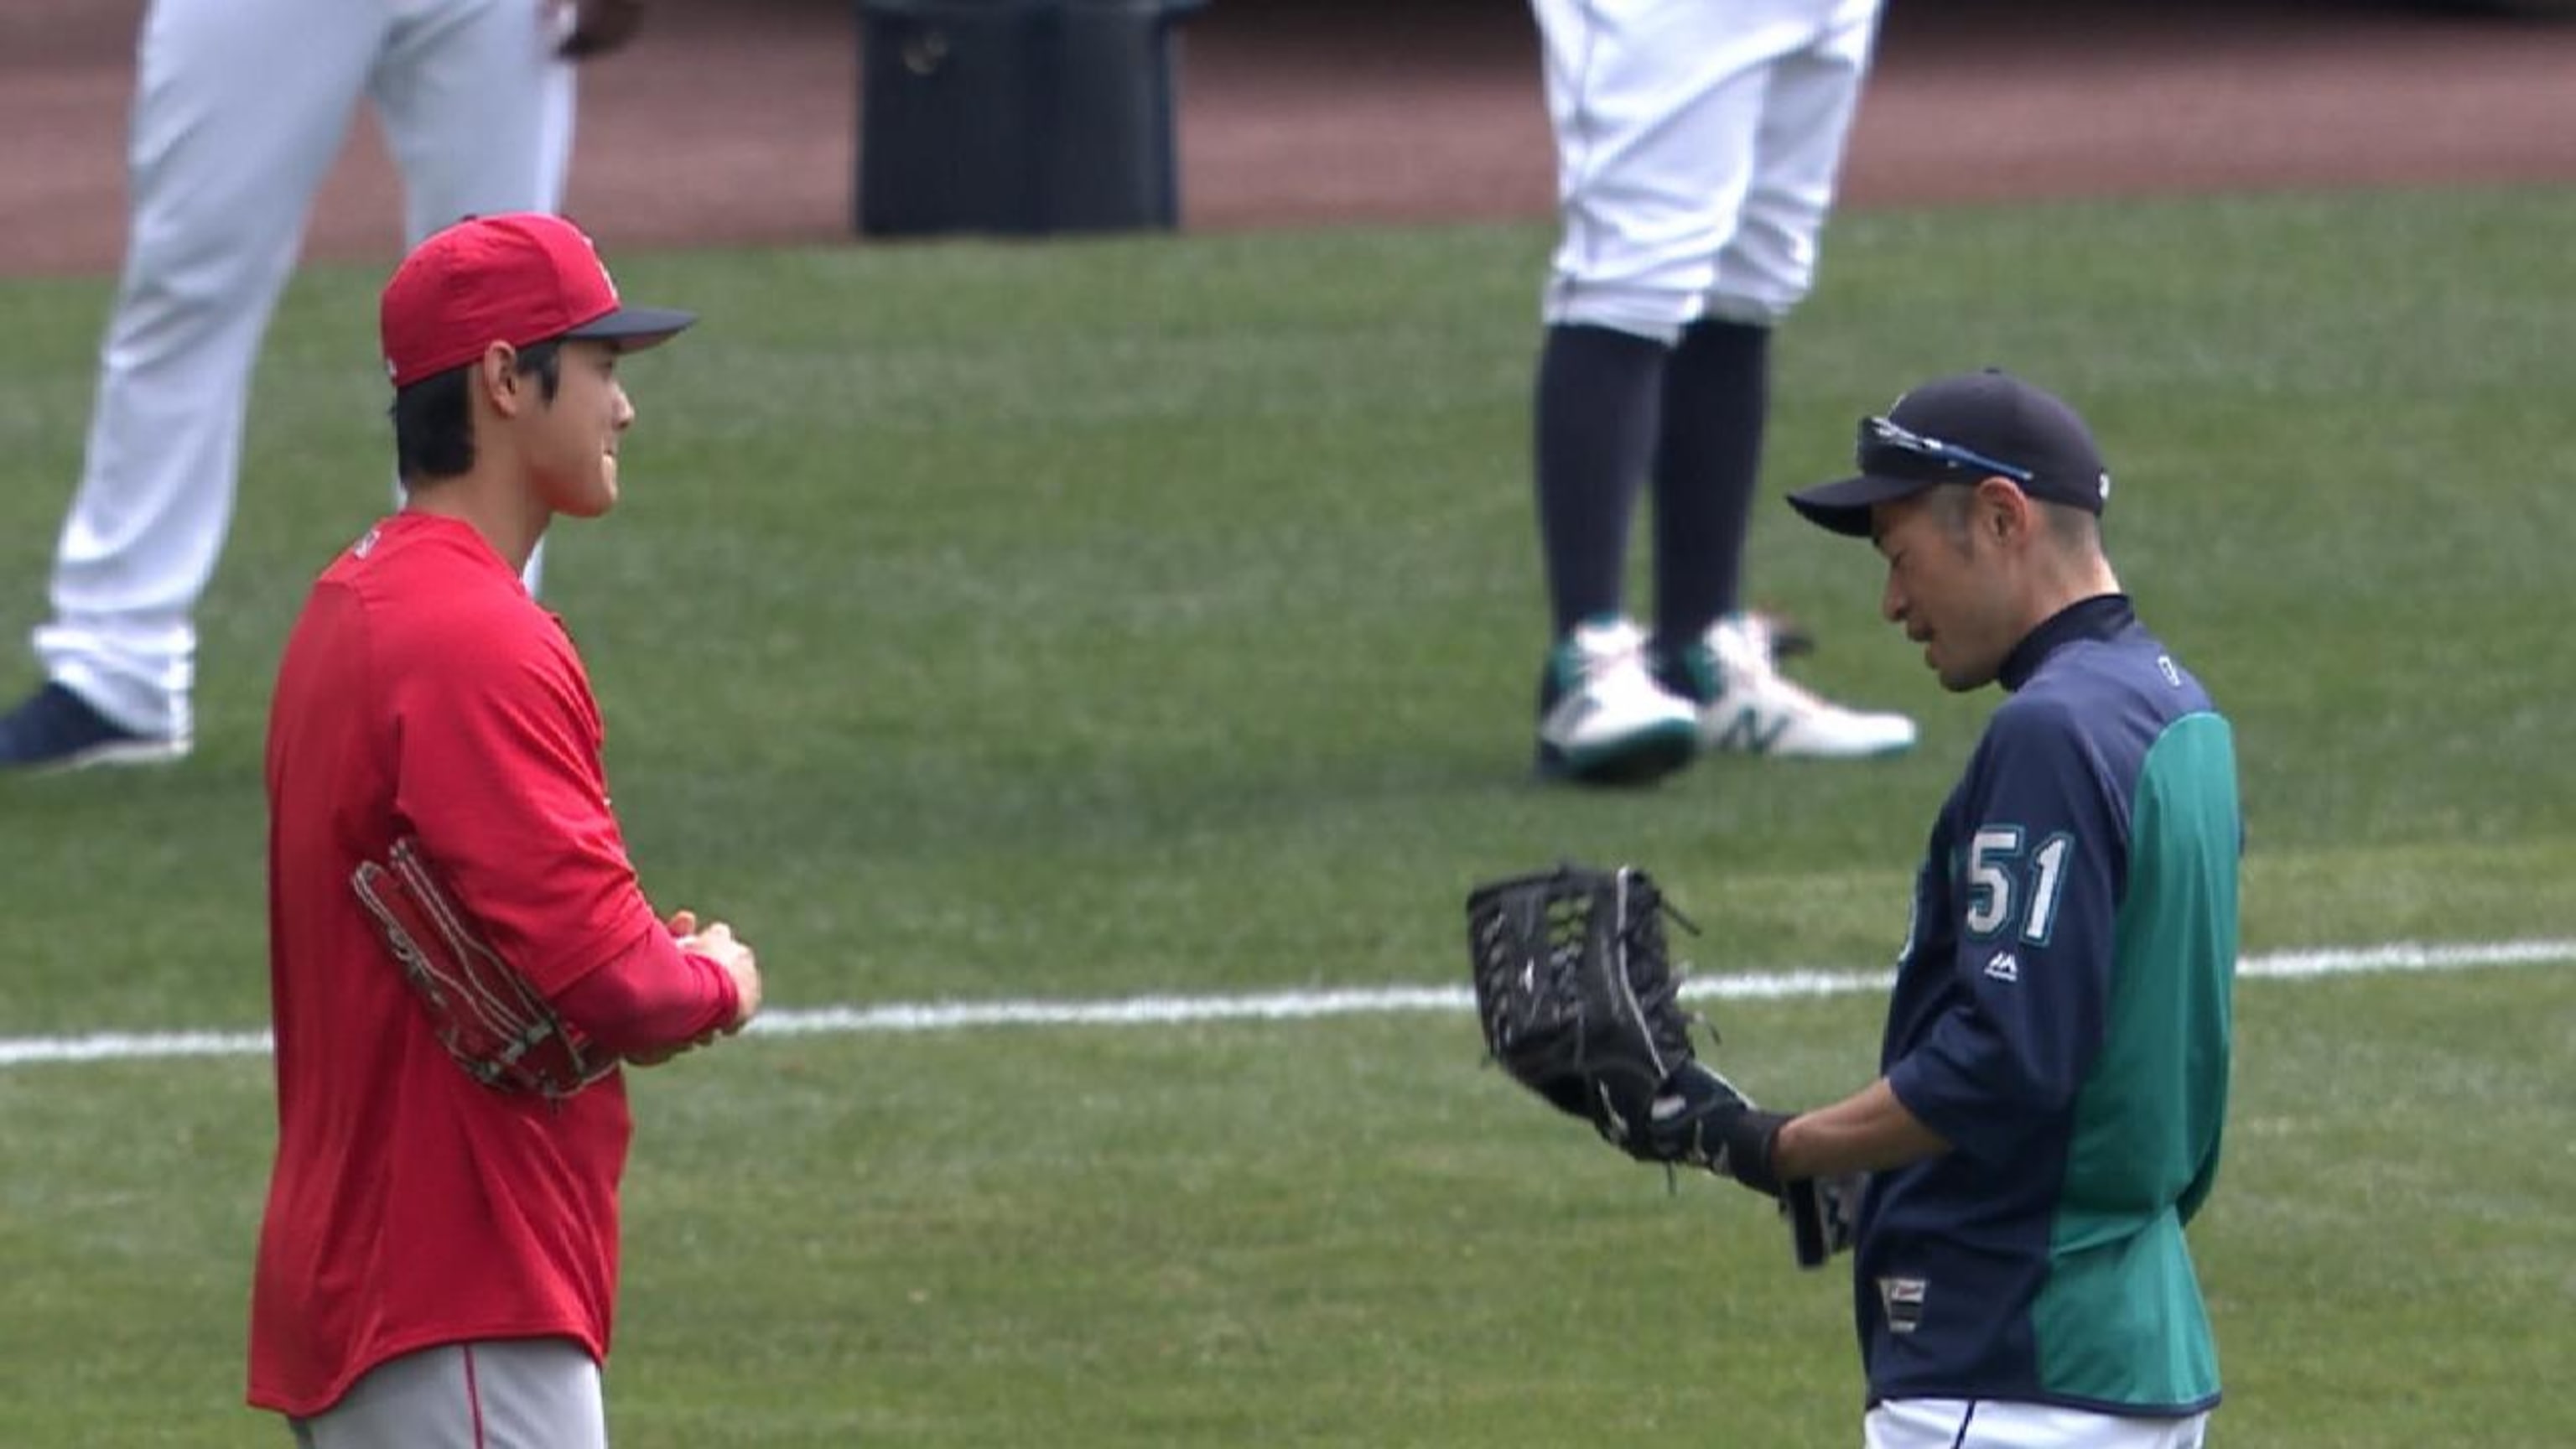 Ichiro's honour by Mariners seems a precursor to Cooperstown